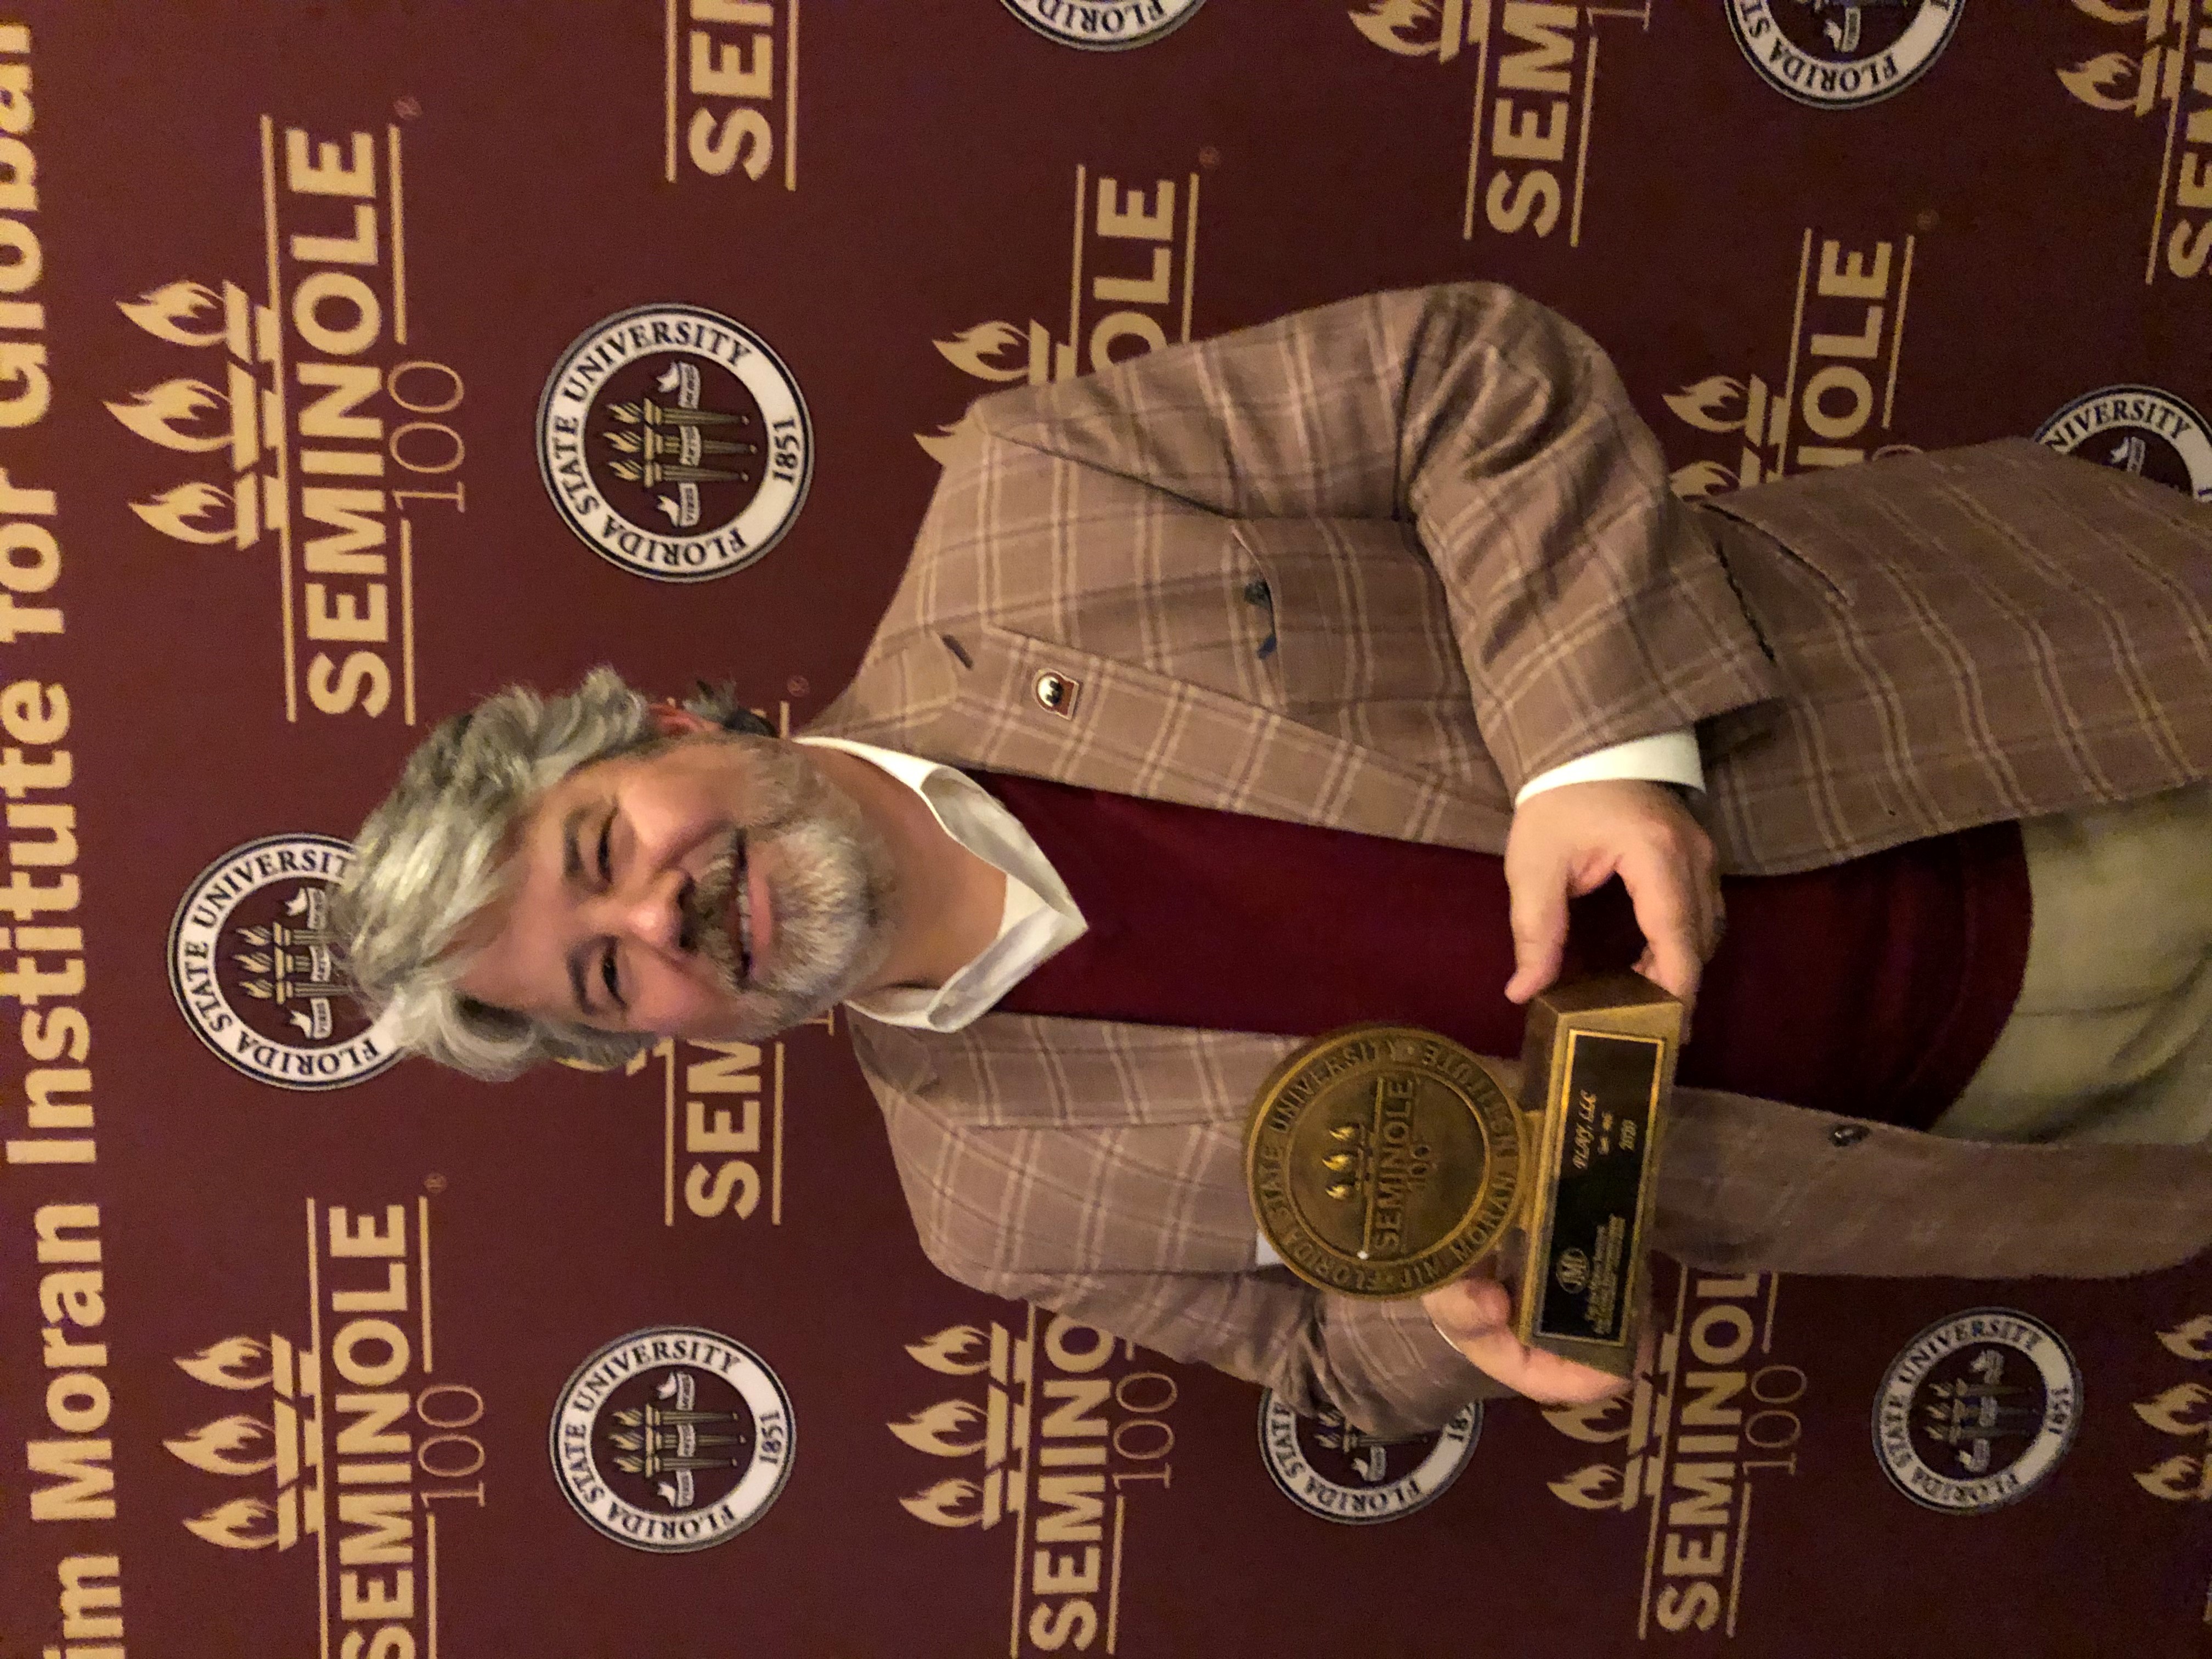 Brett Player, CEO of PLAY, receives the Seminole 100 award in the 2020 ceremony.